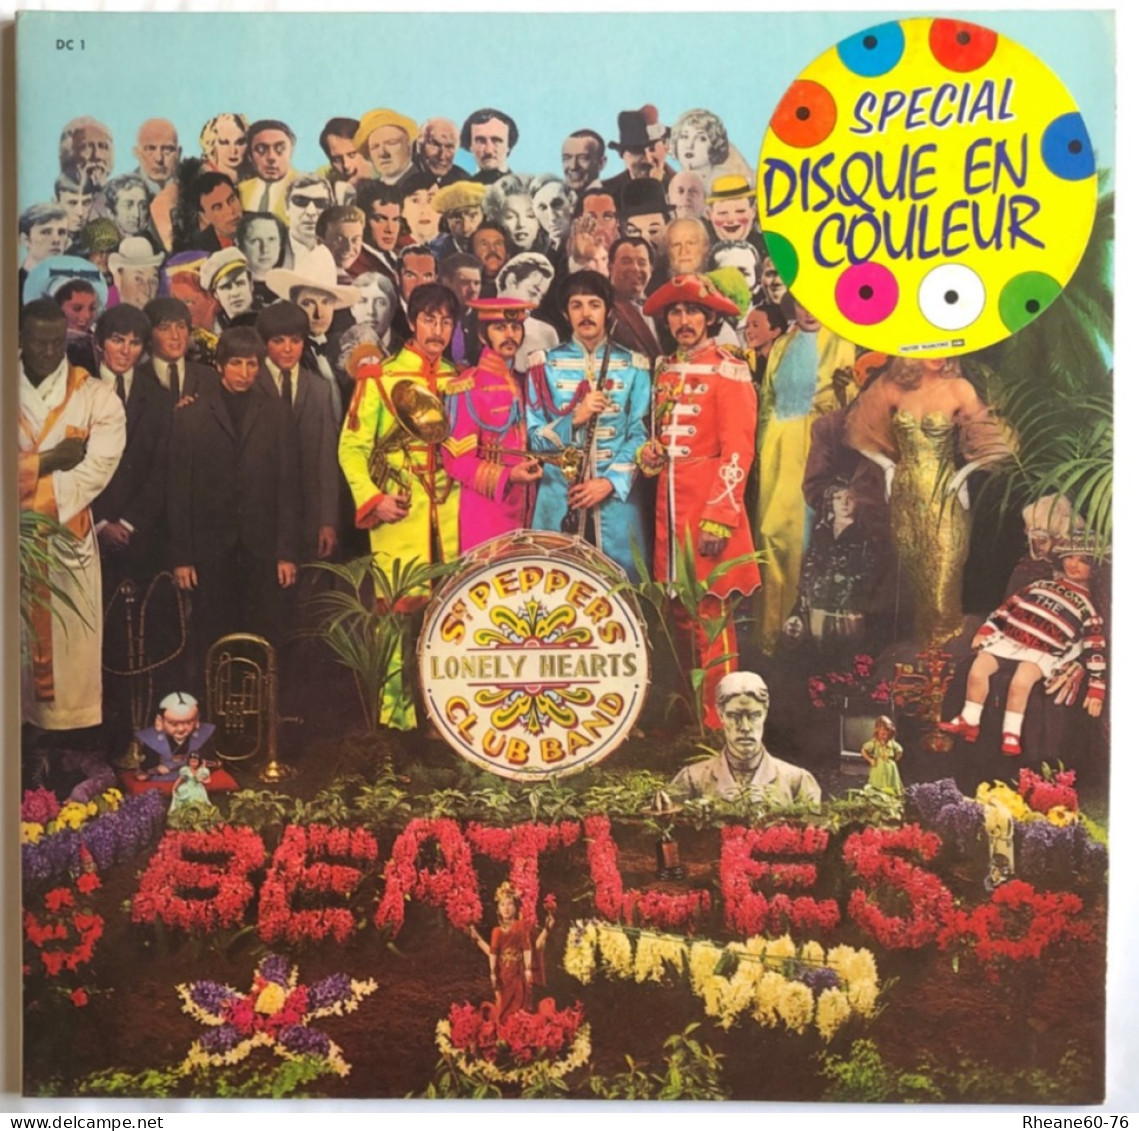 EMI Parlophone - C 066 04 177 - The Beatles - Disque Rouge - Sgt Pepper's Lonely Hearts Club Band - DC1 - Sonstige - Englische Musik